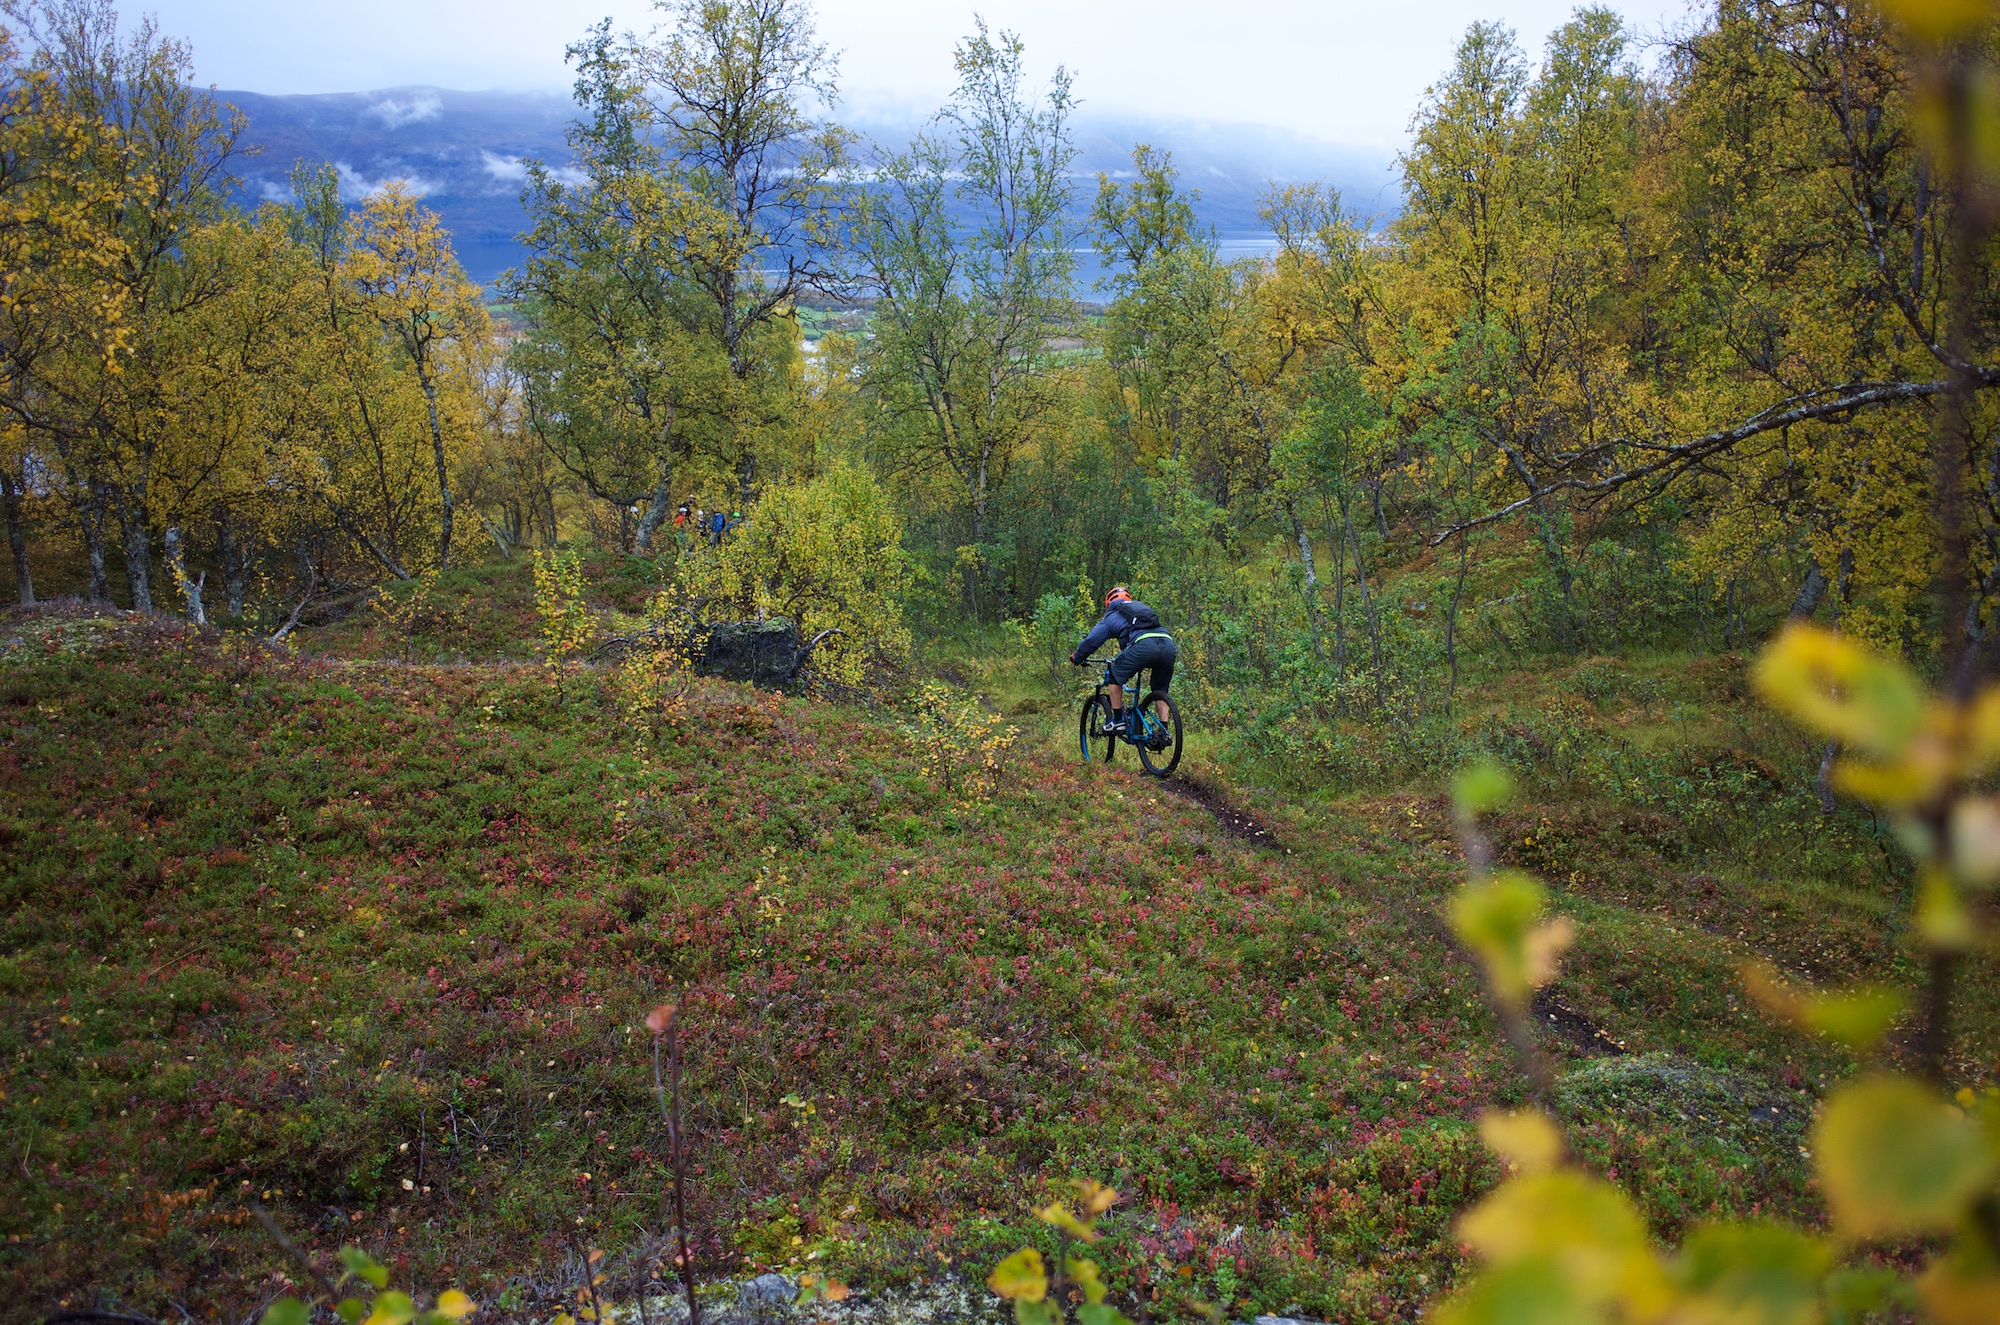 Patrik keeping it low and fast on his home trails.